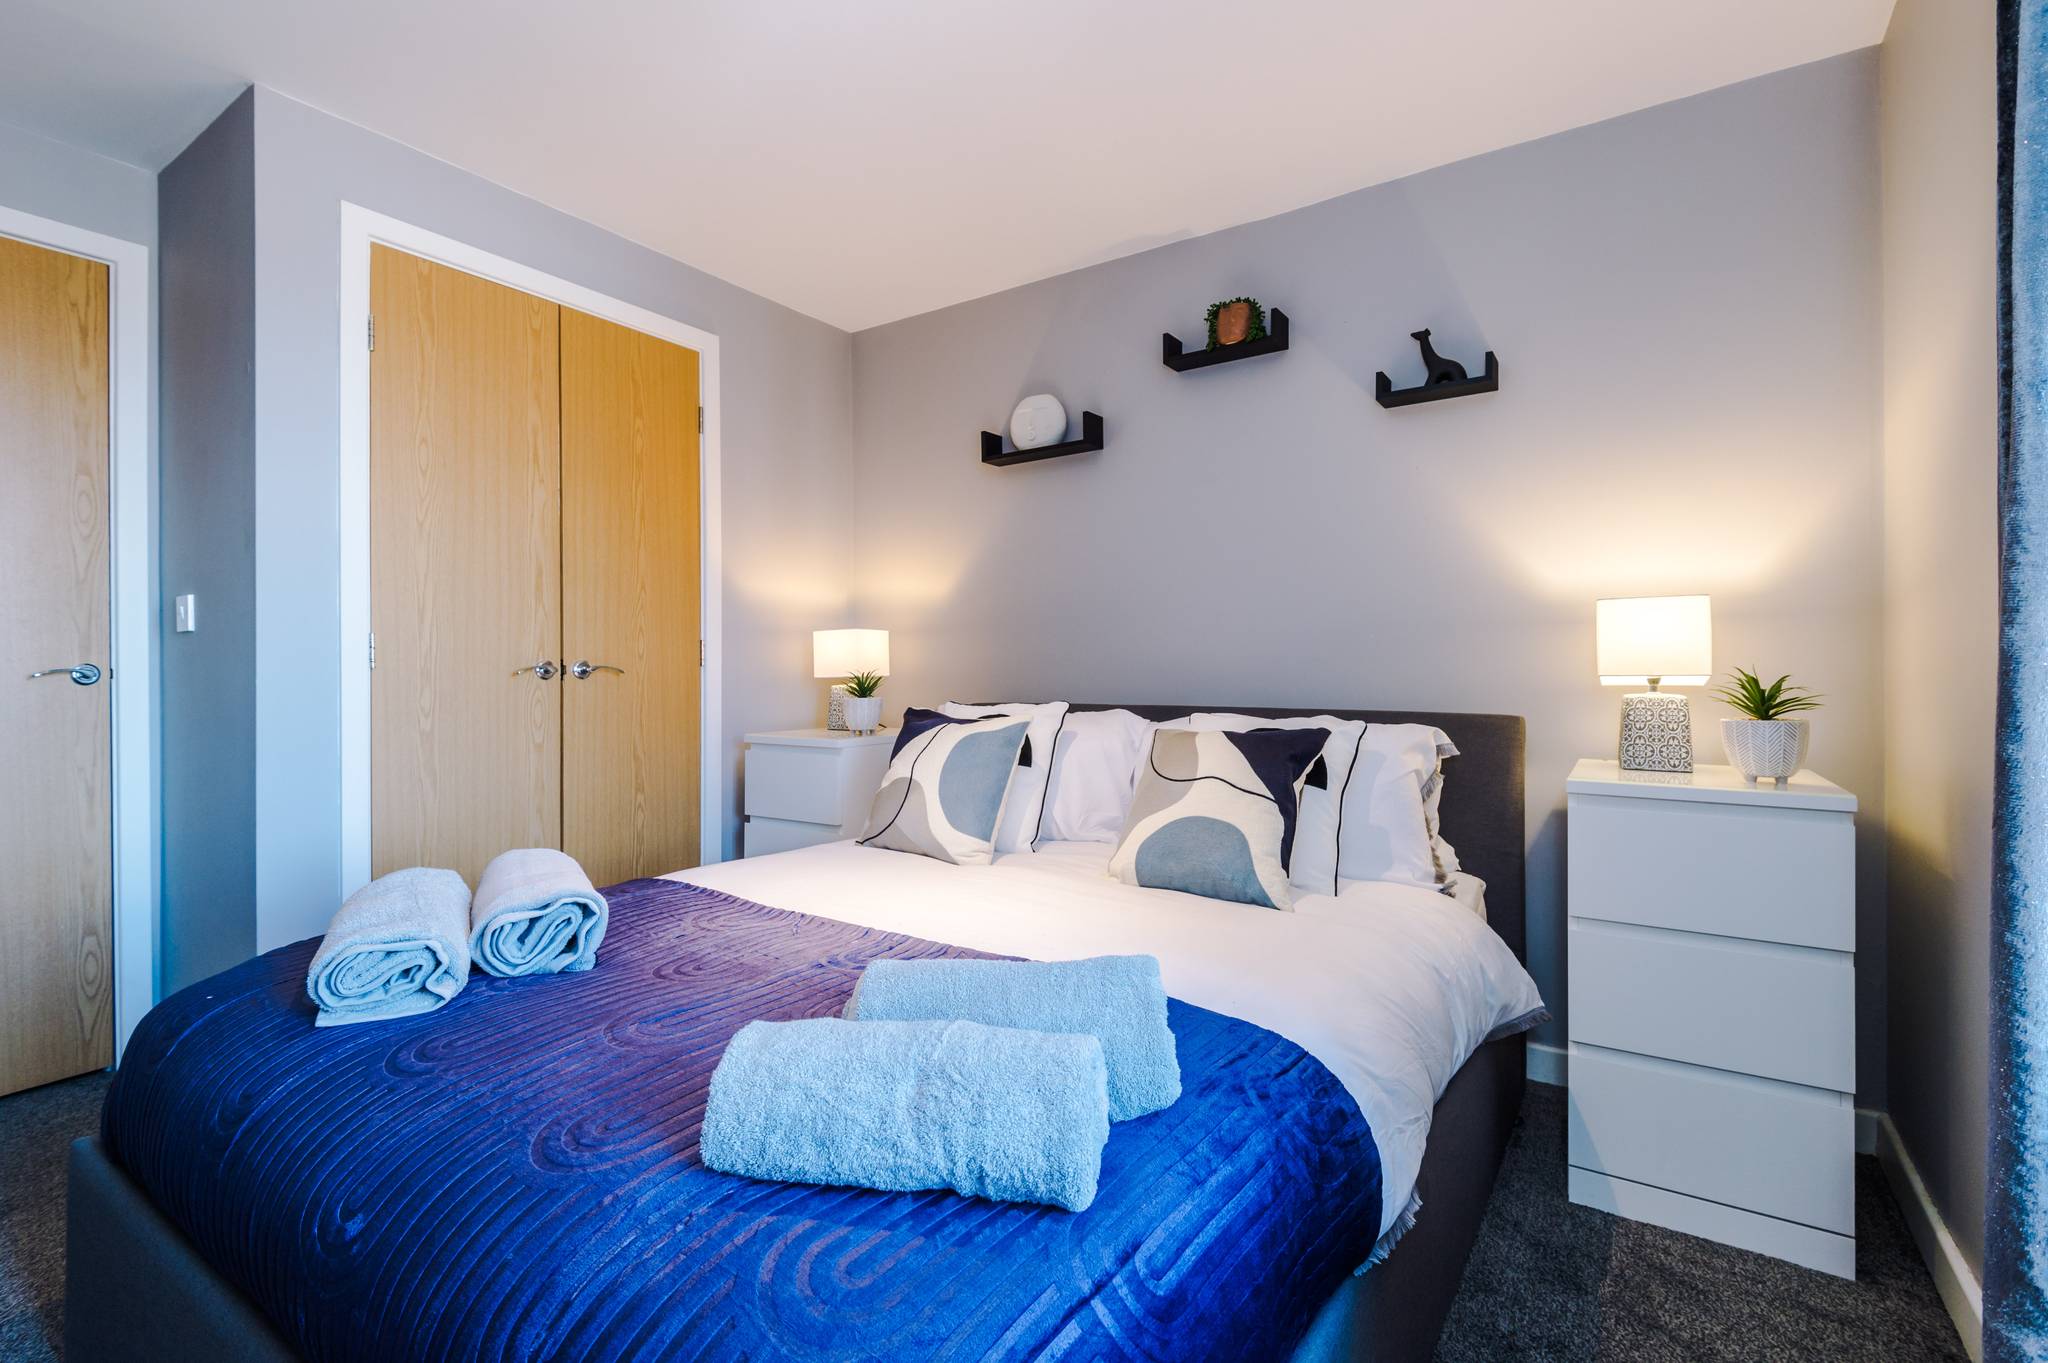 Amazing Spaces Relocations Ltd - MODERN 2 BEDROOM 2 BATHROOM APARTMENT SLEEPS 4 IN WARRINGTON FOR WORK AND LEISURE WITH PRIVATE PARKING BY AMAZING SPACES RELOCATIONS Ltd